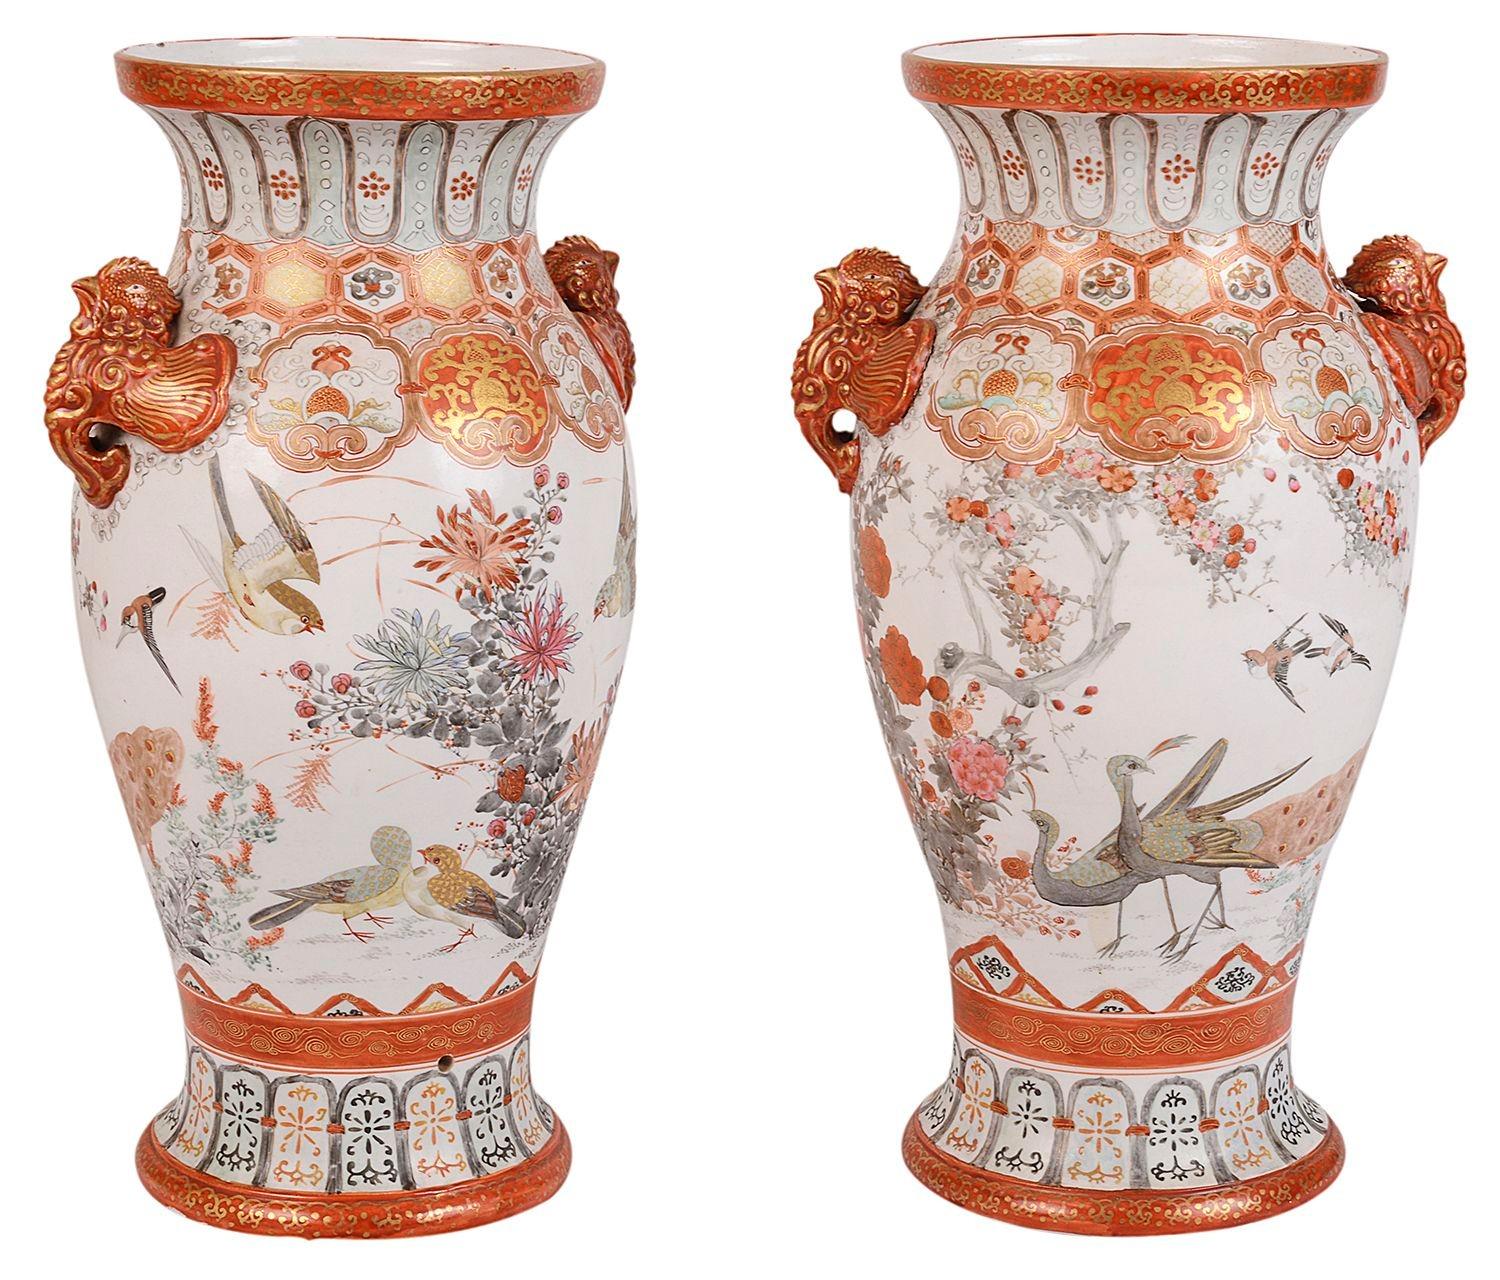 A very good quality pair of Meiji period (1868-1912) Japanese Kutani vases / lamps. Each with classical motif decoration, exotic flowers and bird decoration and handles either side. Signed to the base.
 
 
Batch 72 (18).